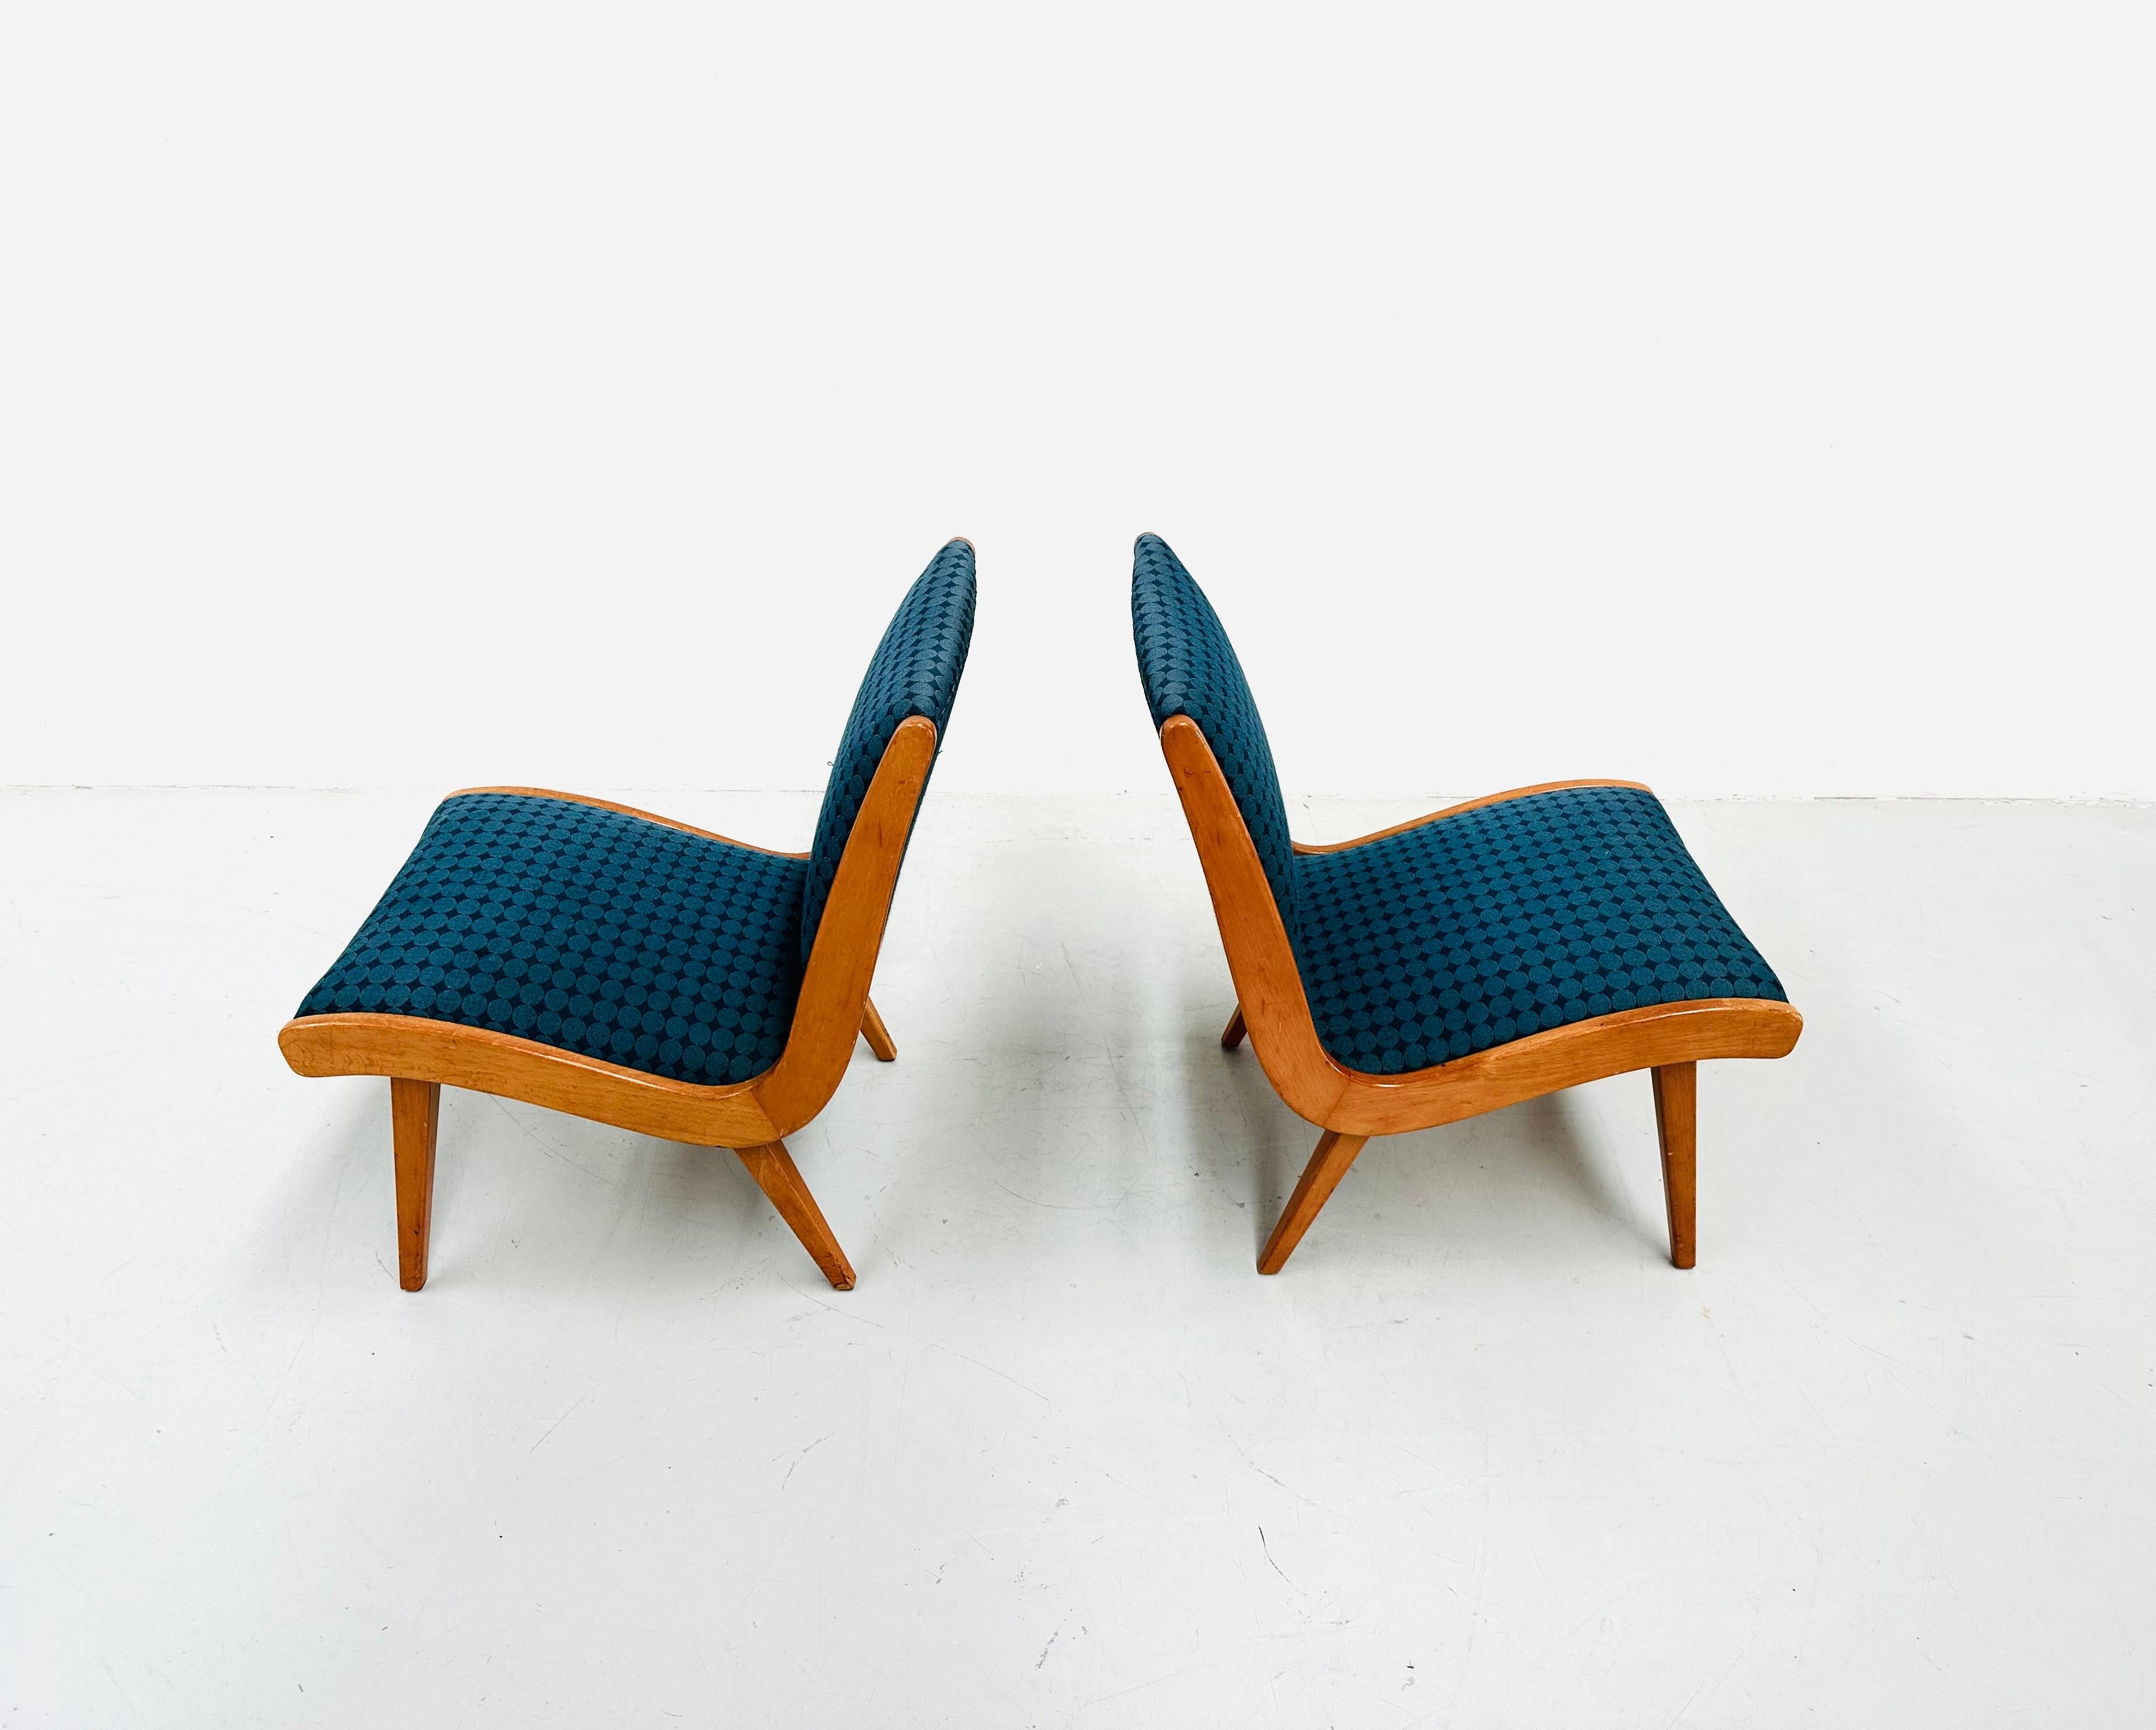 1950s Rare Set Vostra Chairs Numbered & Original Fabric by Jens Risom for Knoll. en vente 9